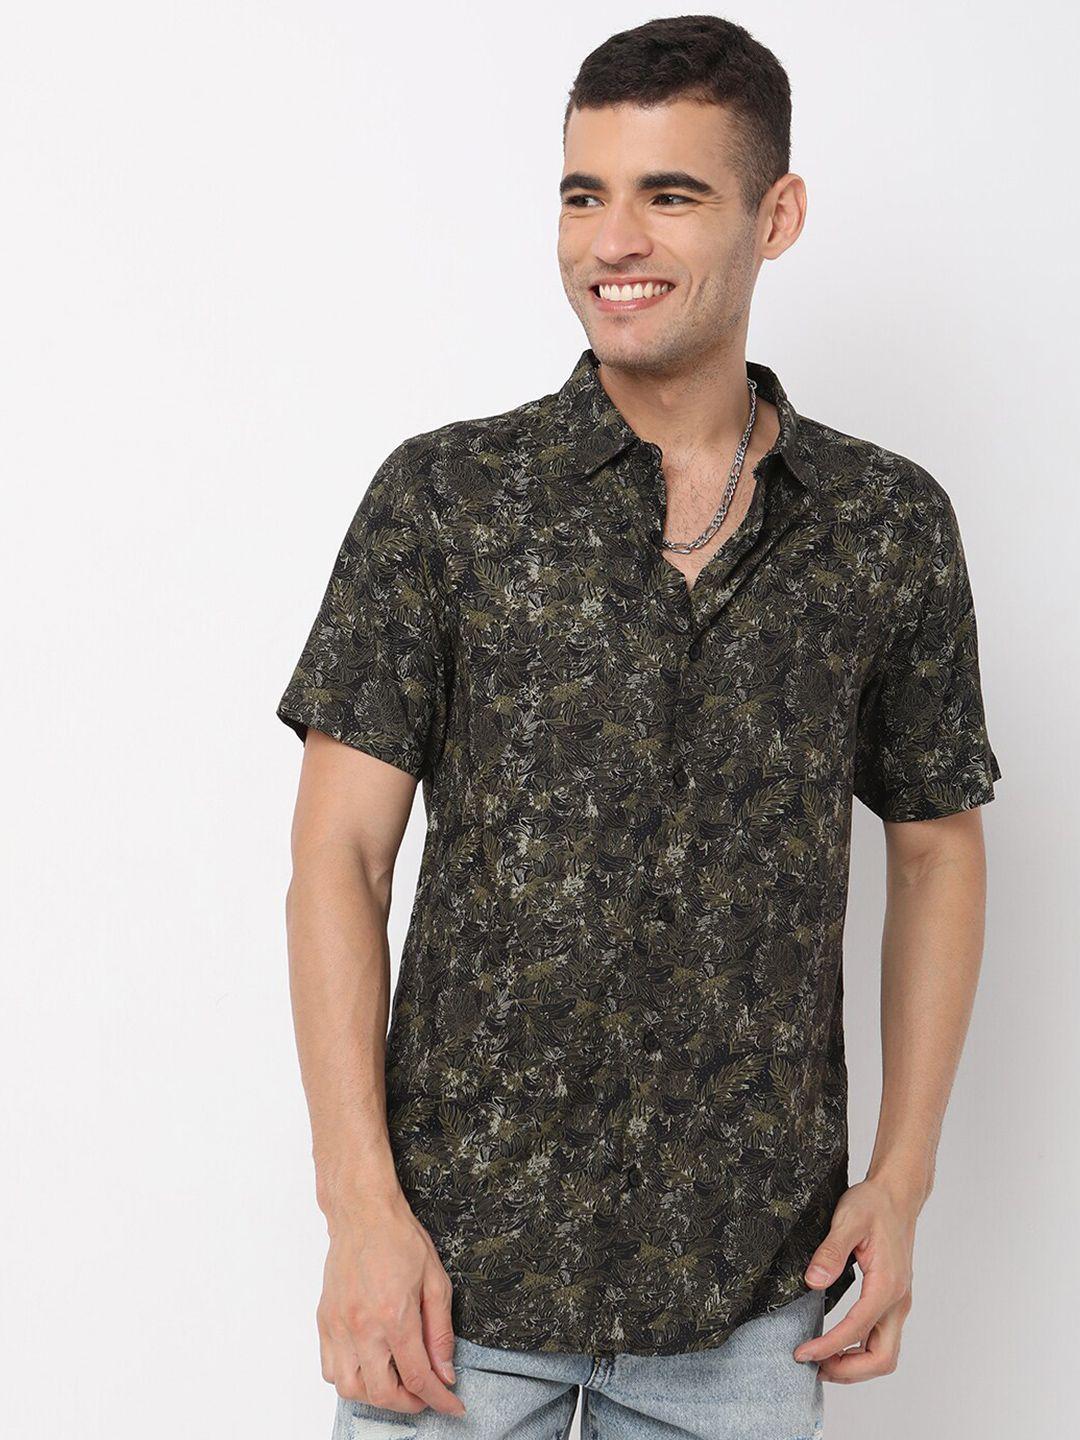 7shores classic floral printed casual shirt